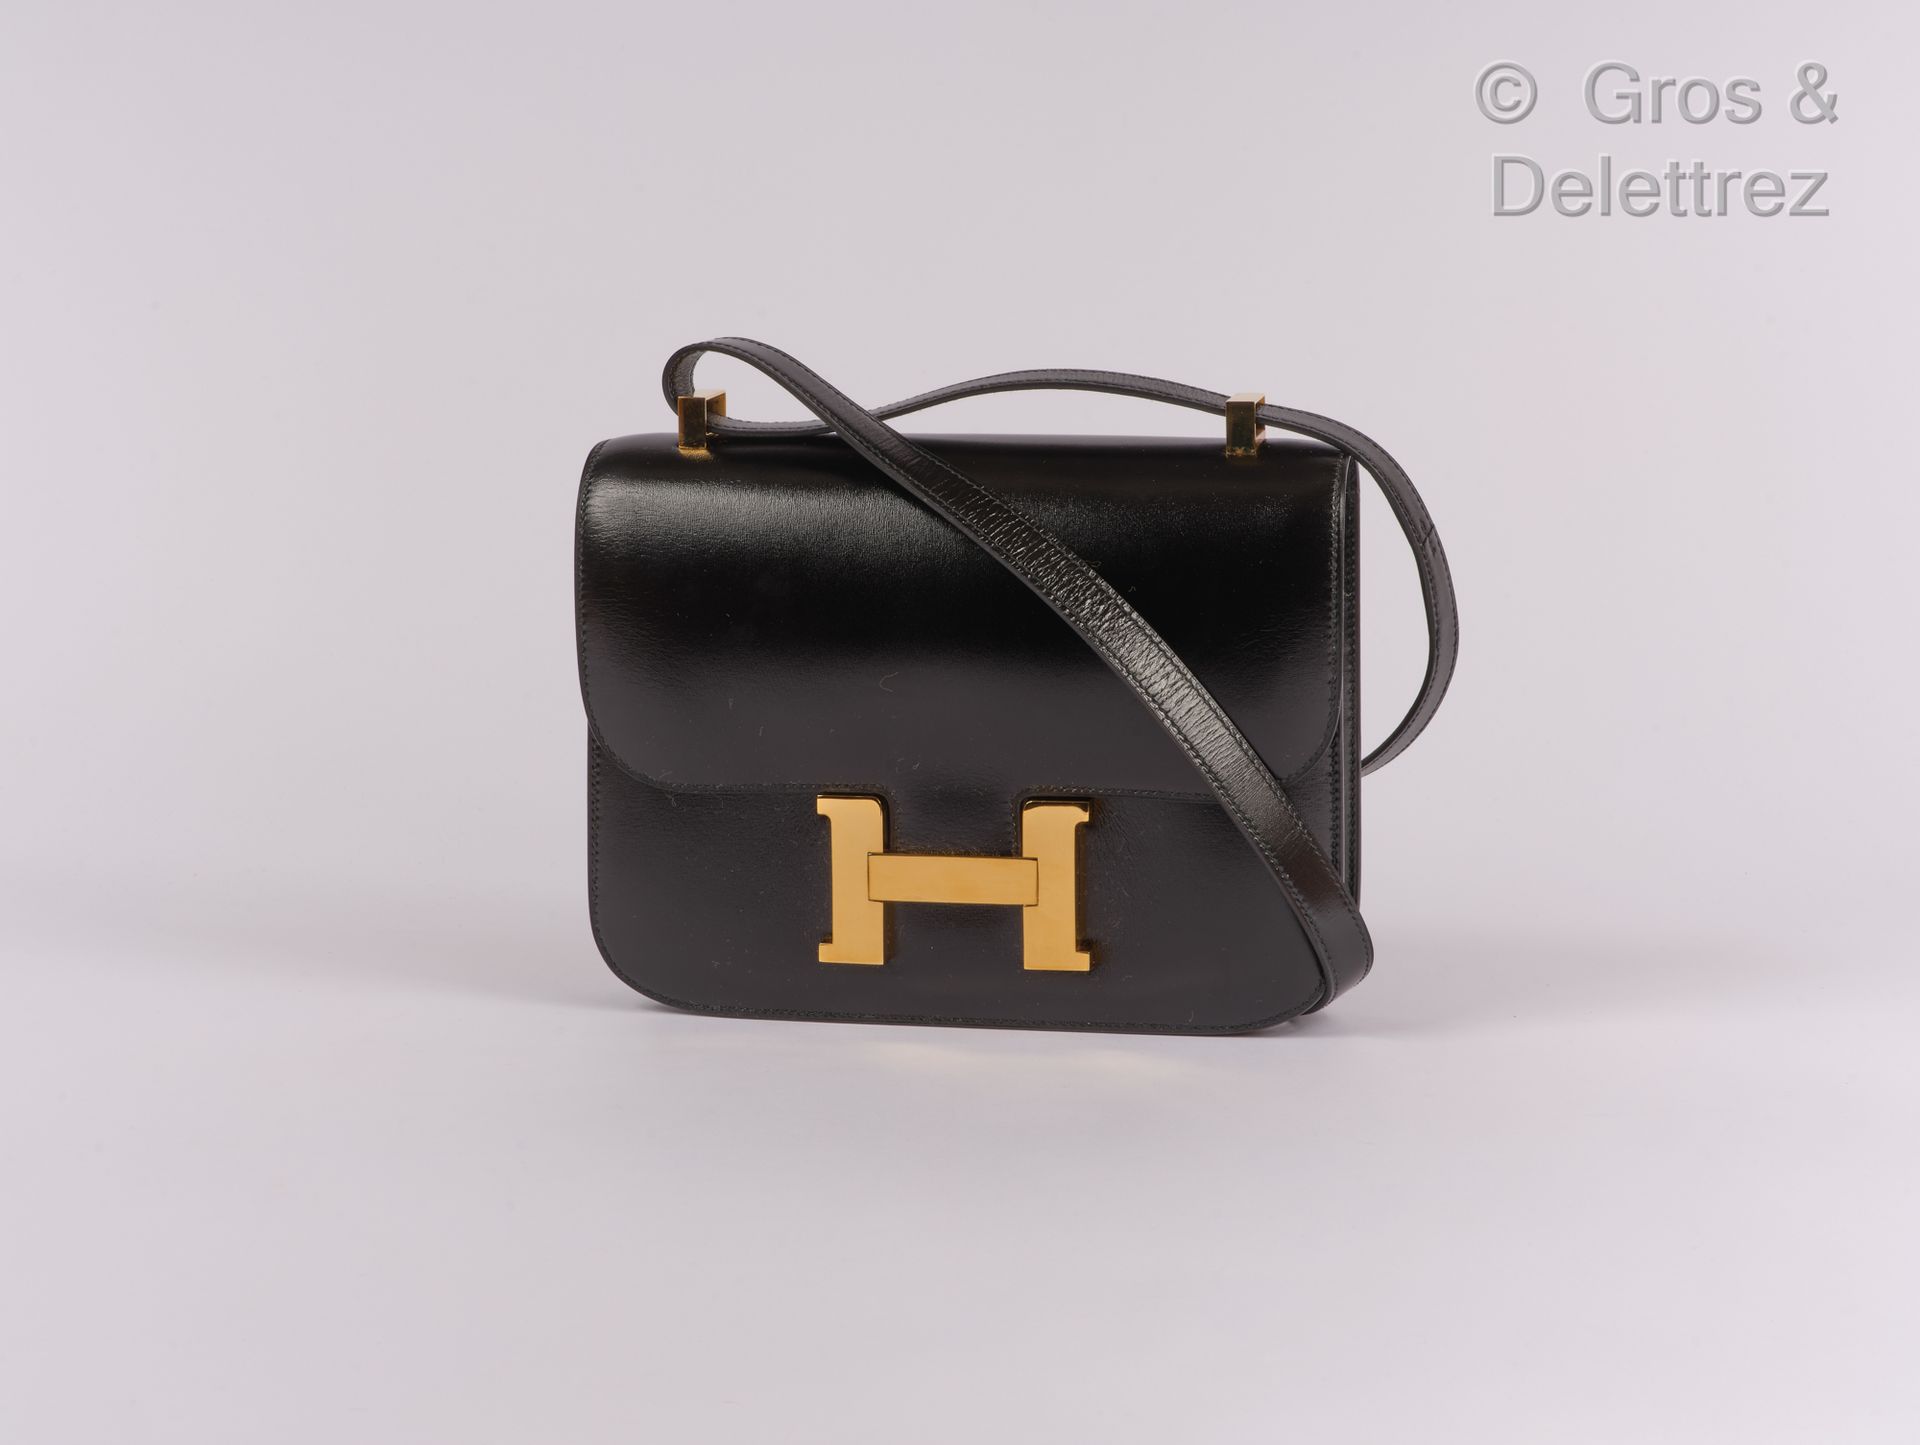 HERMÈS Paris made in France Bag " Constance " 23 cm in black box, gold plated " &hellip;